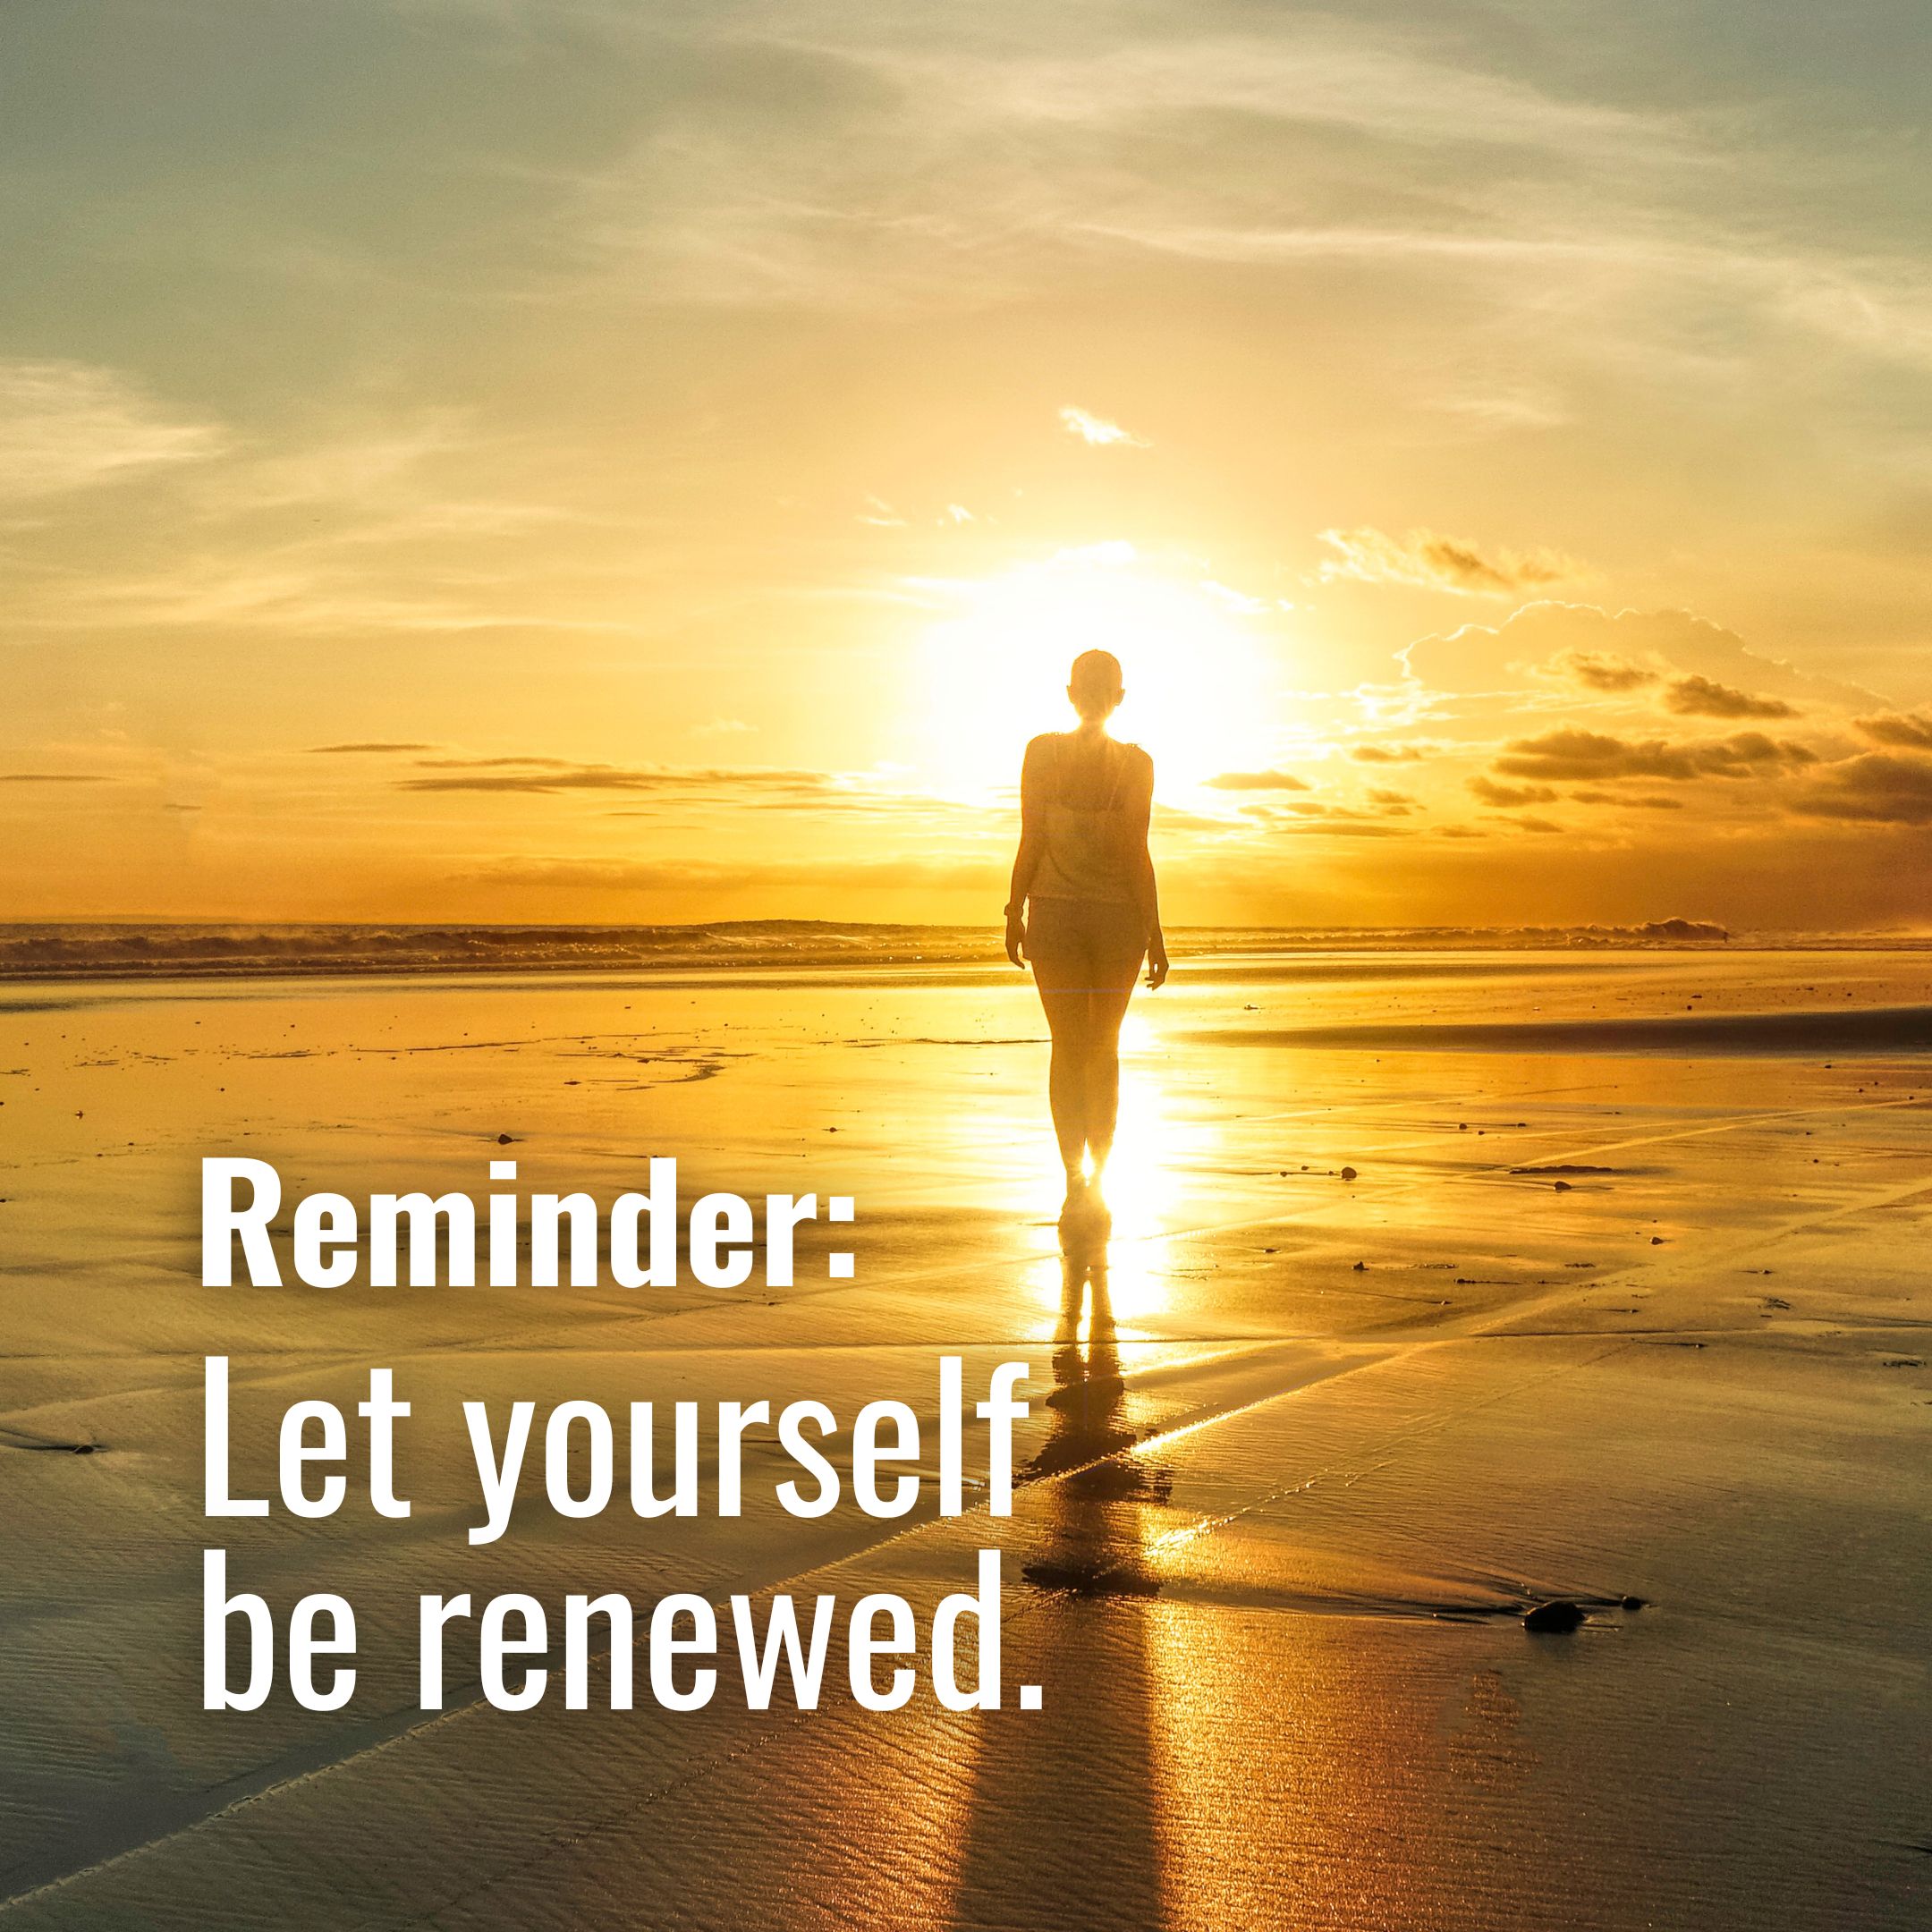 Let yourself be renewed.